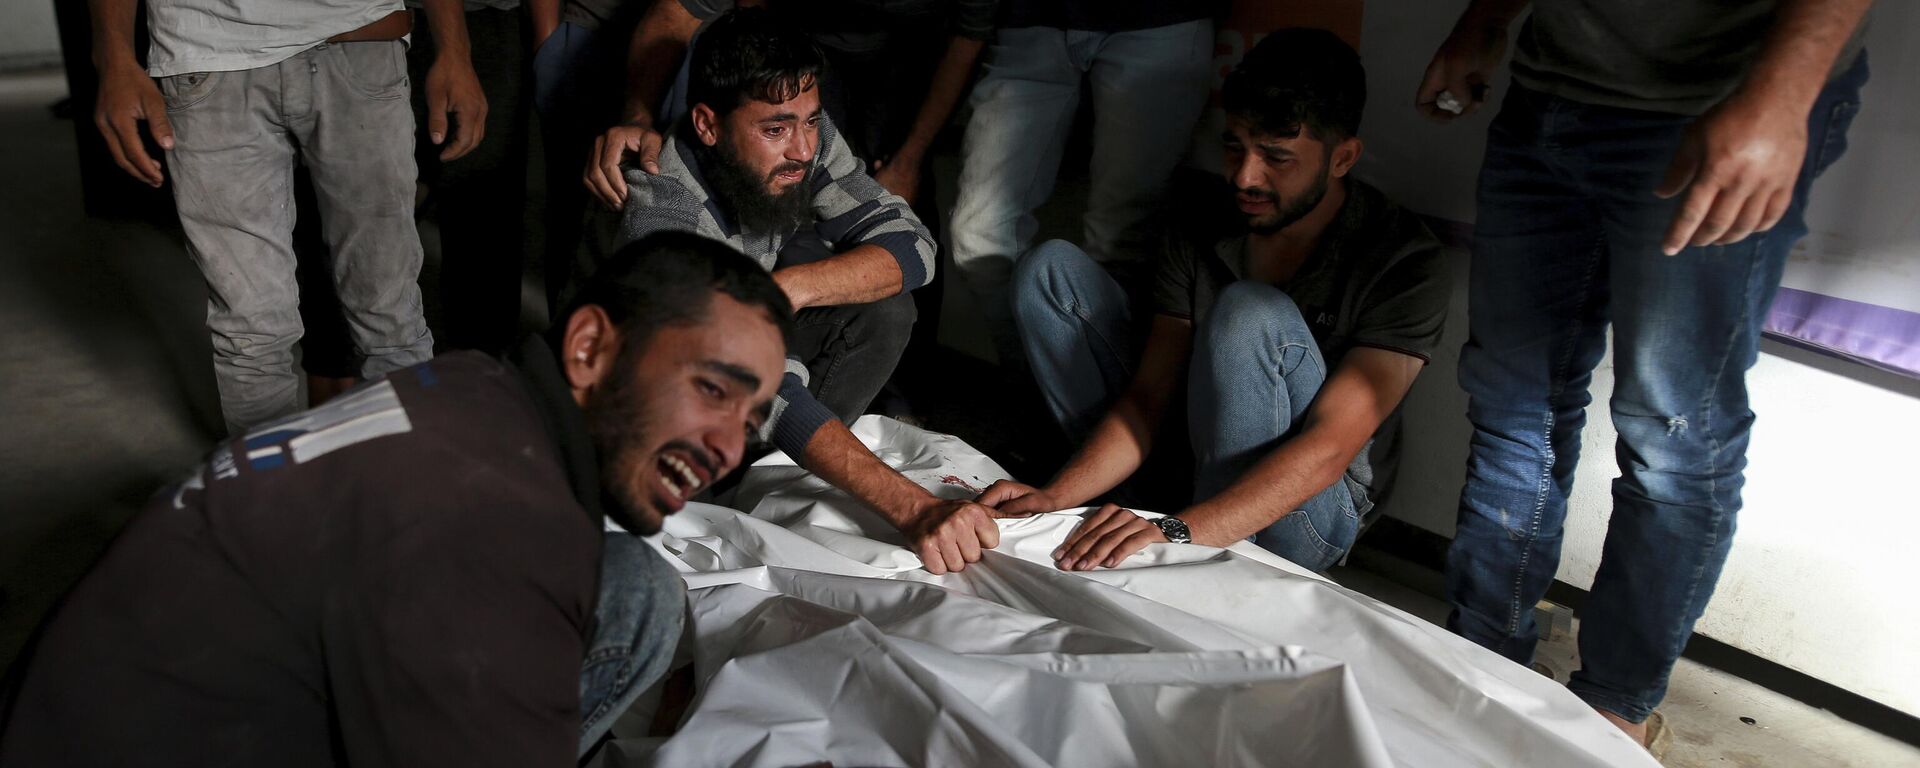 Palestinians mourn over the bodies of relatives killed in an Israeli airstrike, at a morgue in Rafah, Gaza Strip, Monday, May 27, 2024. Palestinian health workers said Israeli airstrikes Sunday killed at least 35 people sheltering in a tent camp for displaced people. Israel's army confirmed the strike and said it hit a Hamas installation and killed two senior Hamas militants. (AP Photo/Jehad Alshrafi) - Sputnik International, 1920, 29.05.2024